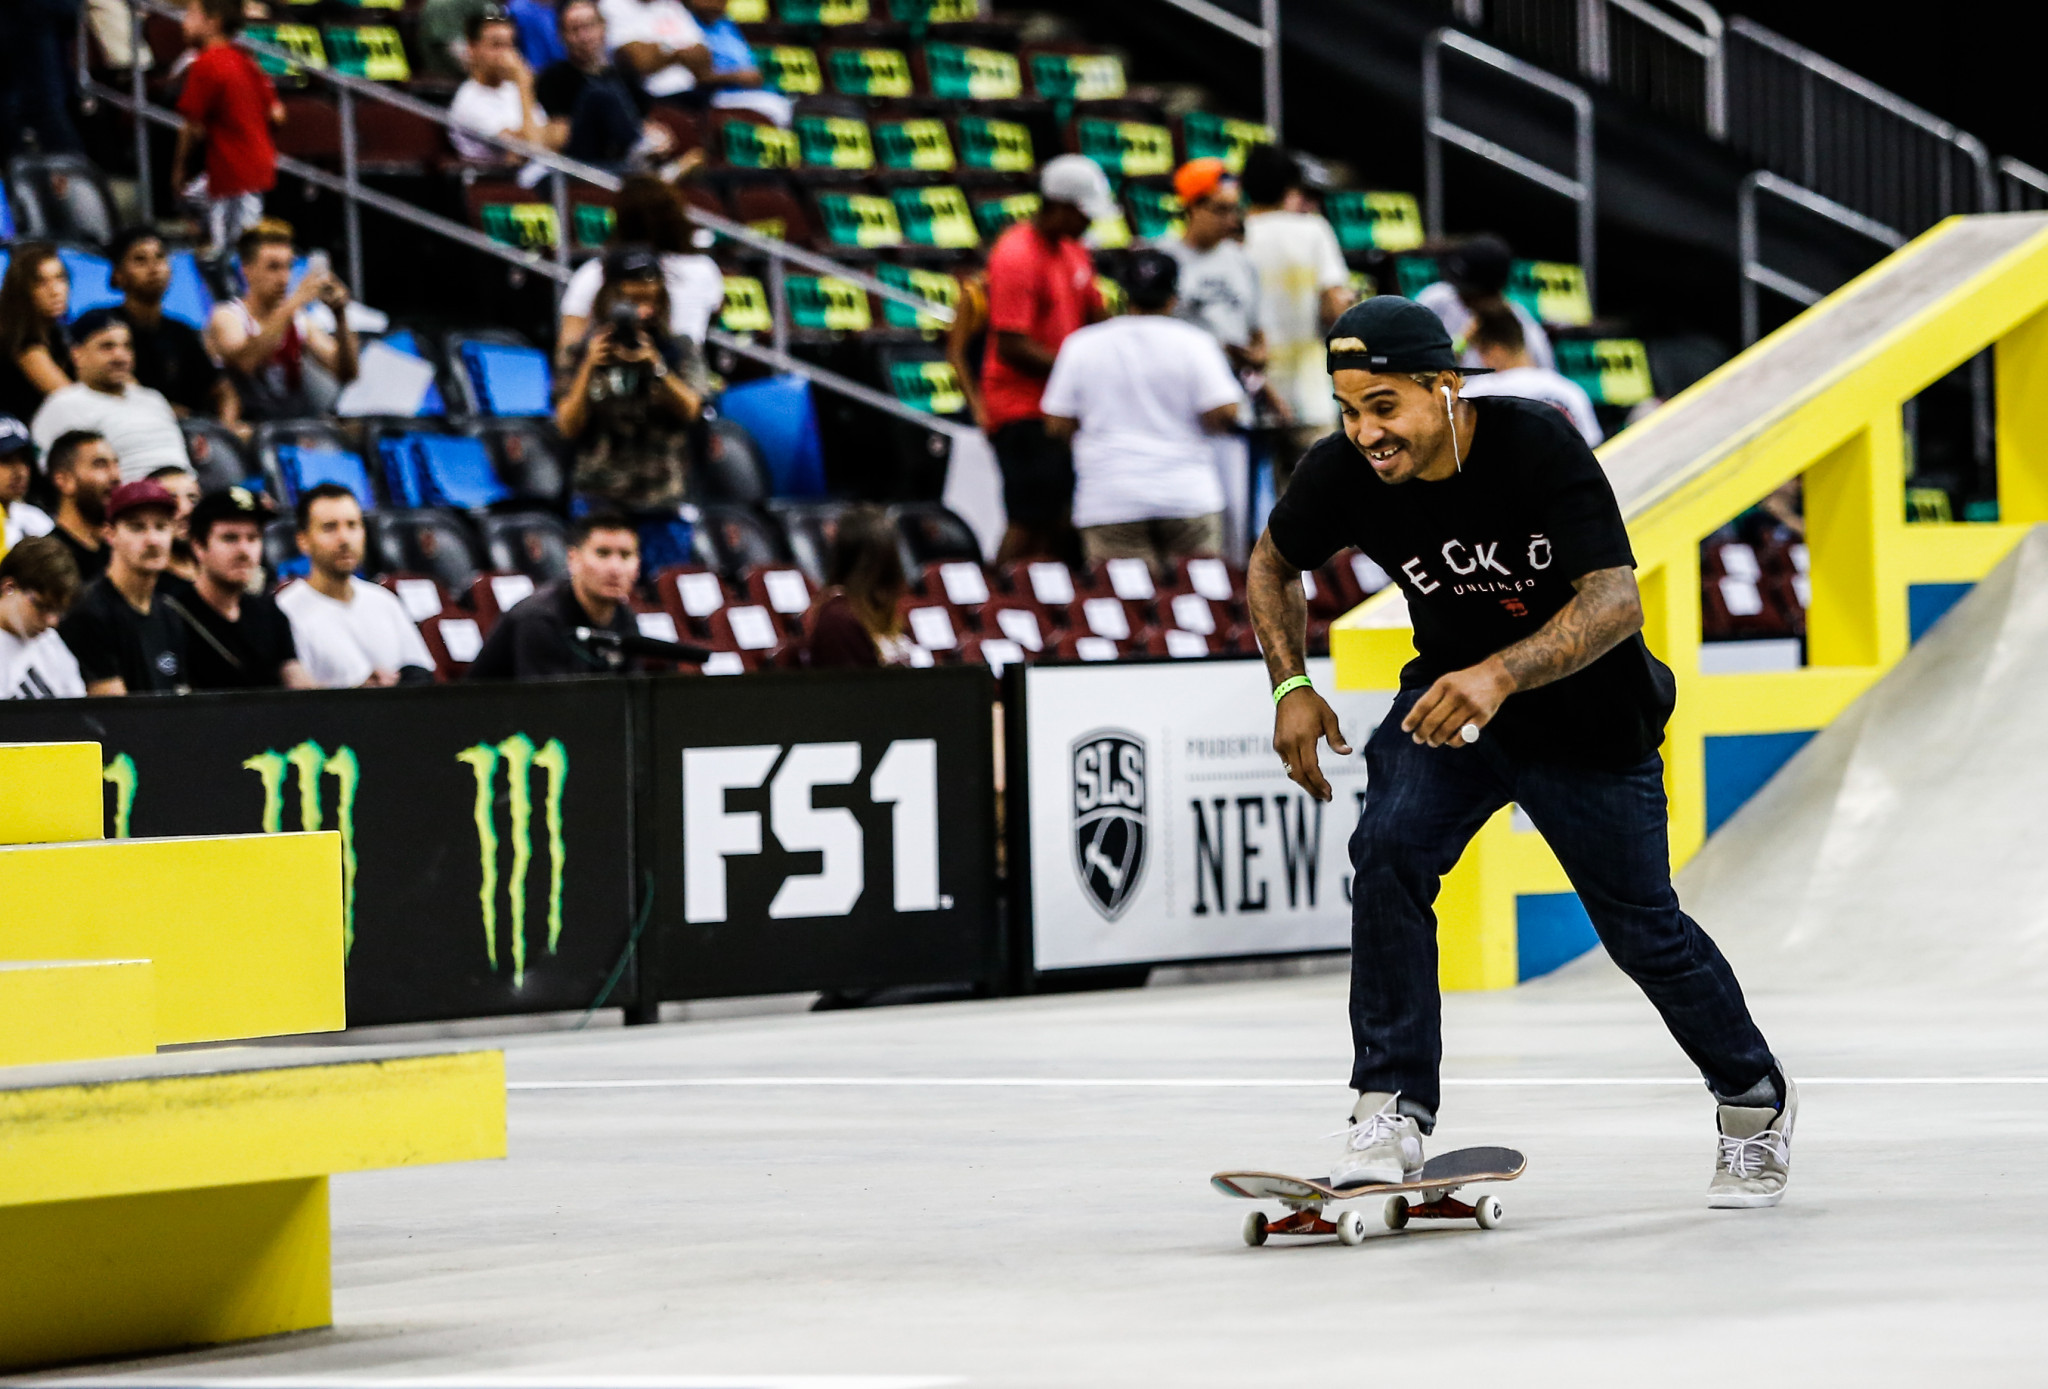 Manny Santiago wins pro street skateboarding title at FISE Battle of the Champions